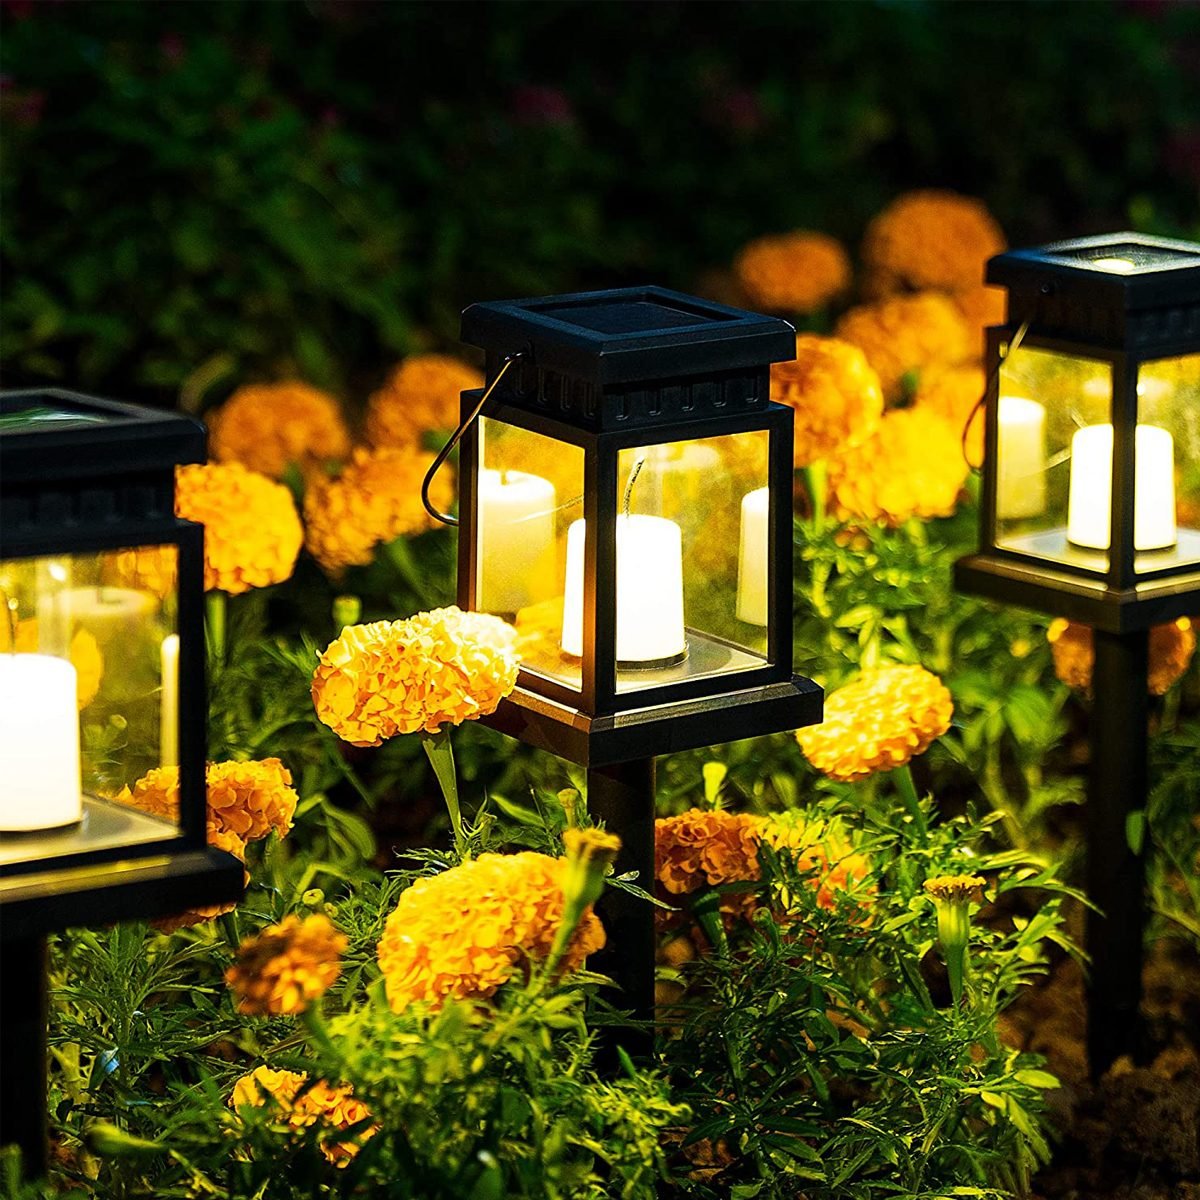 Solpex Solar Pathway Lights 8 Pack Led Outdoor Hanging Lanterns Garden Solar Lights With Stake For Walkway Ecomm Amazon.com